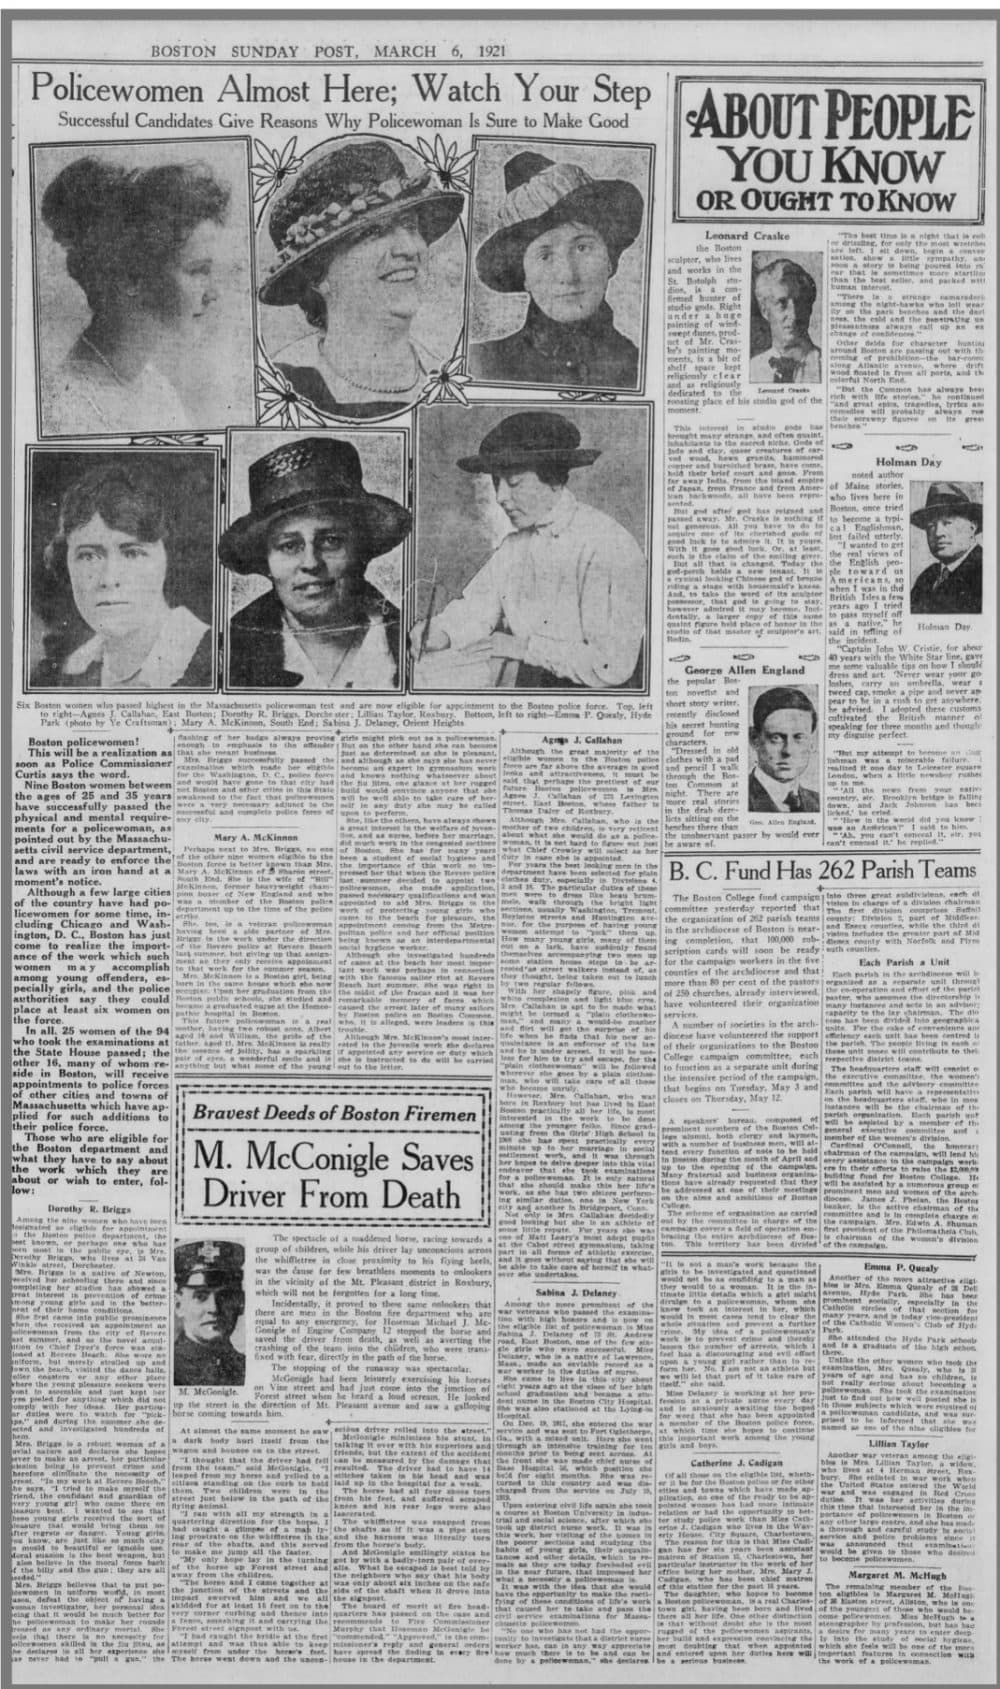 An article about the first female cops in Boston, published in the Boston Post on Sunday, March 6, 1921 under the headline &quot;Policewomen Almost Here: Watch Your Step.&quot; (Boston Post)